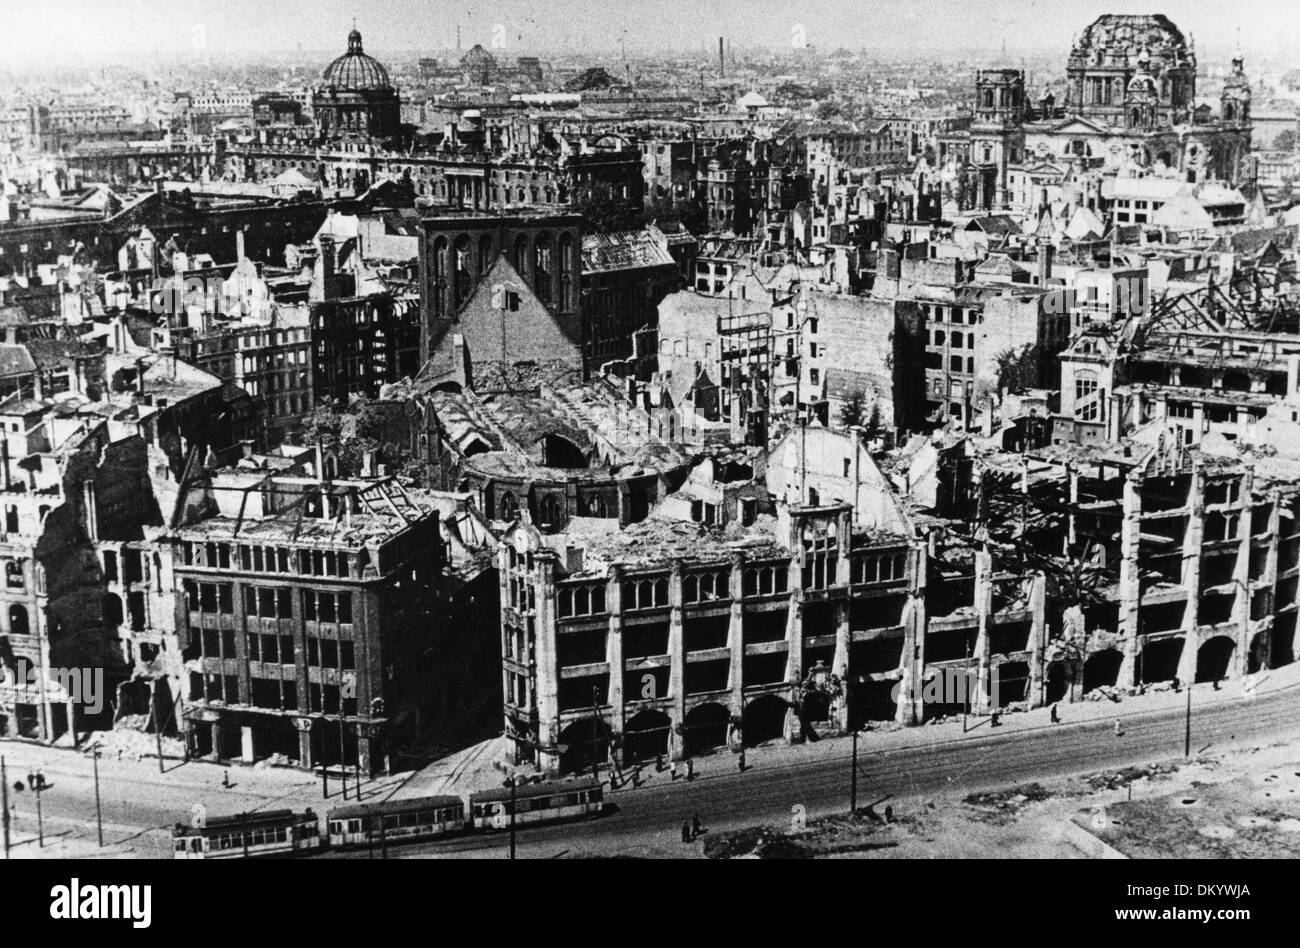 View over the ruins of the Nikolaiviertel in Berlin after the end of World War II in 1945 - in the foreground, the destroyed St. Nicholas' Church, to the left, the dome of the Stadtschloss Berlin, in the background the Reichstag. To the right, the Berlin Cathedral. Fotoarchiv für Zeitgeschichte Stock Photo